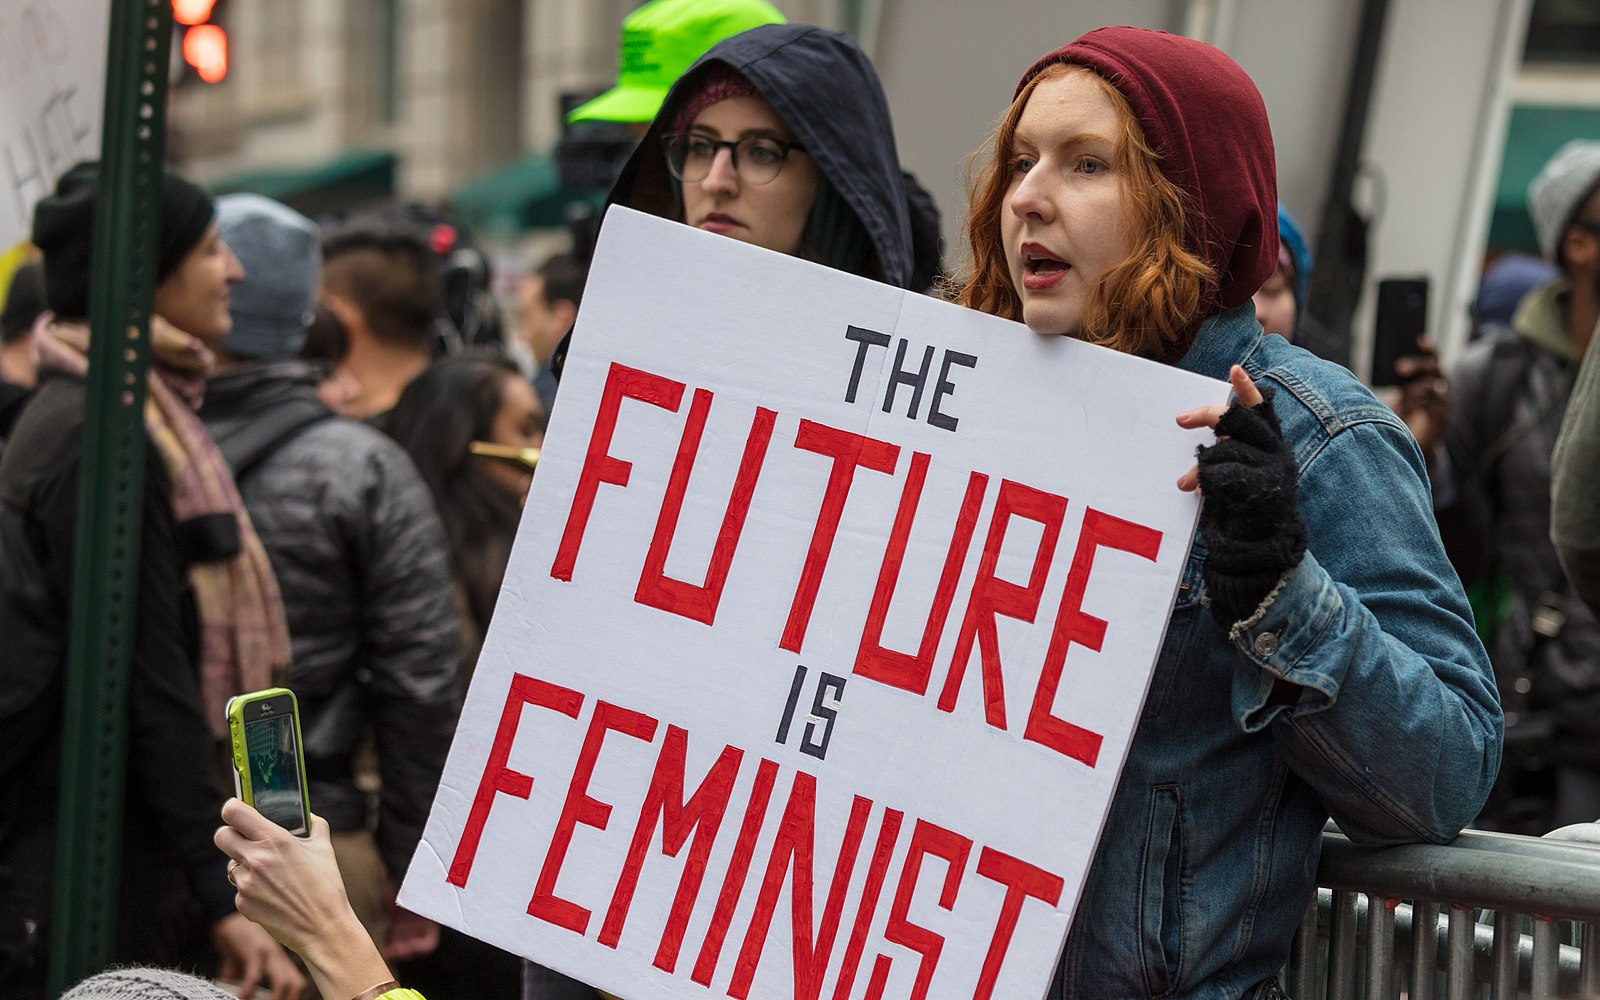 “I have a thing about feminine rage”: misogyny in the media